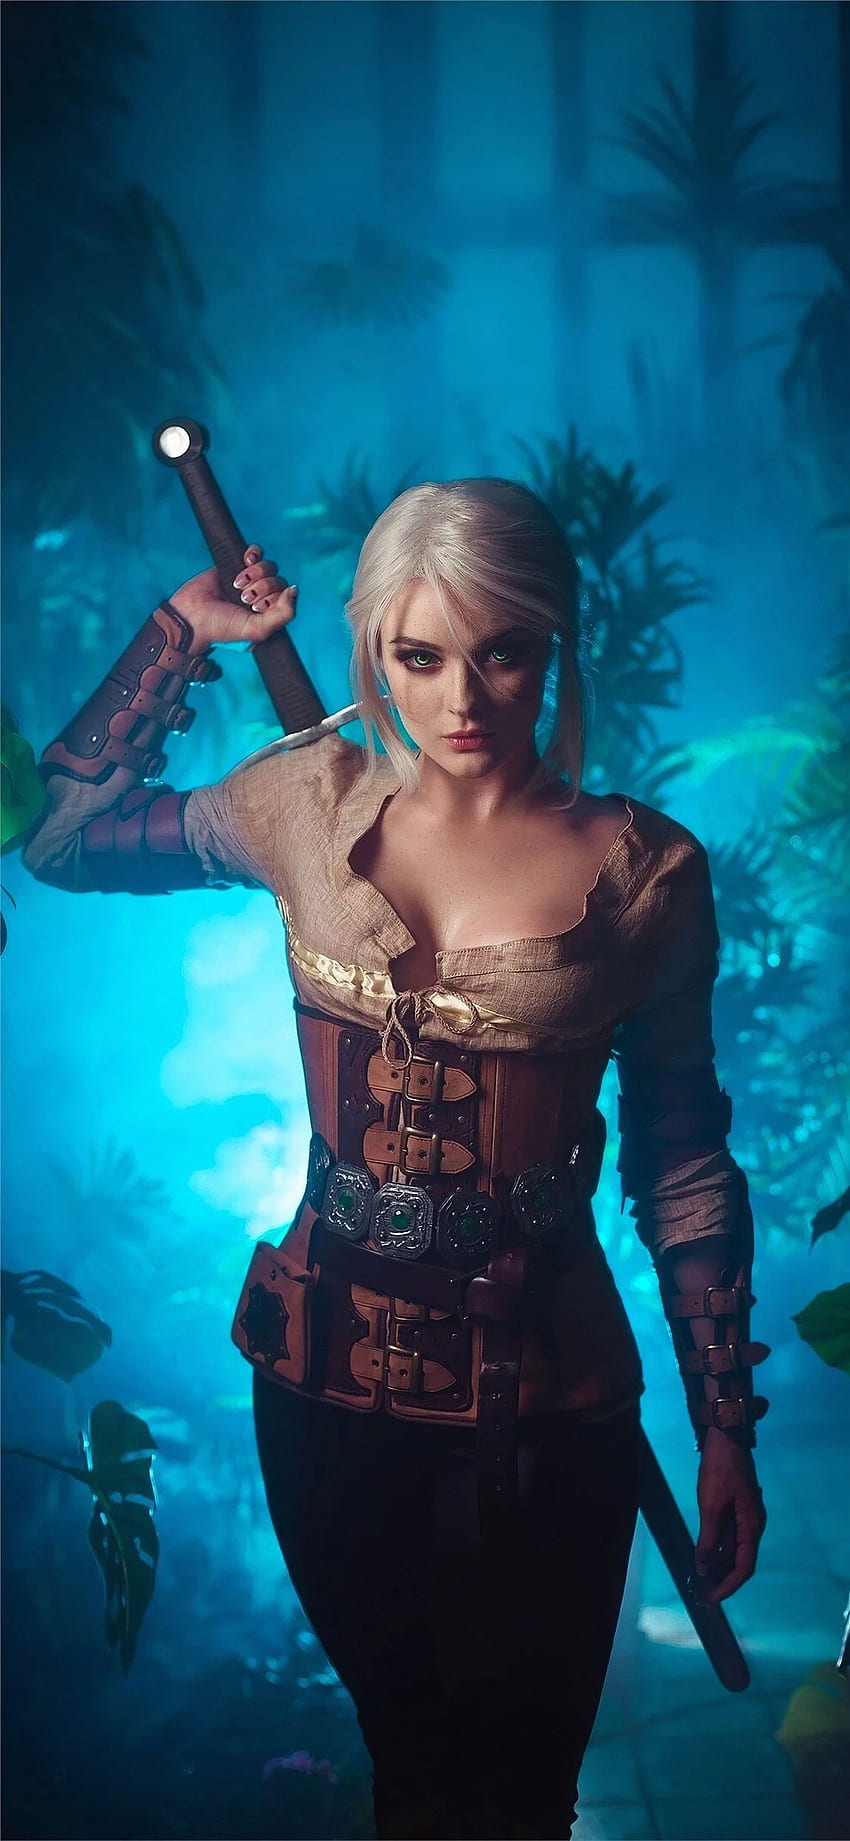 Best the witcher 3 iPhone X, Ciri The Witcher 3 HD phone wallpaper